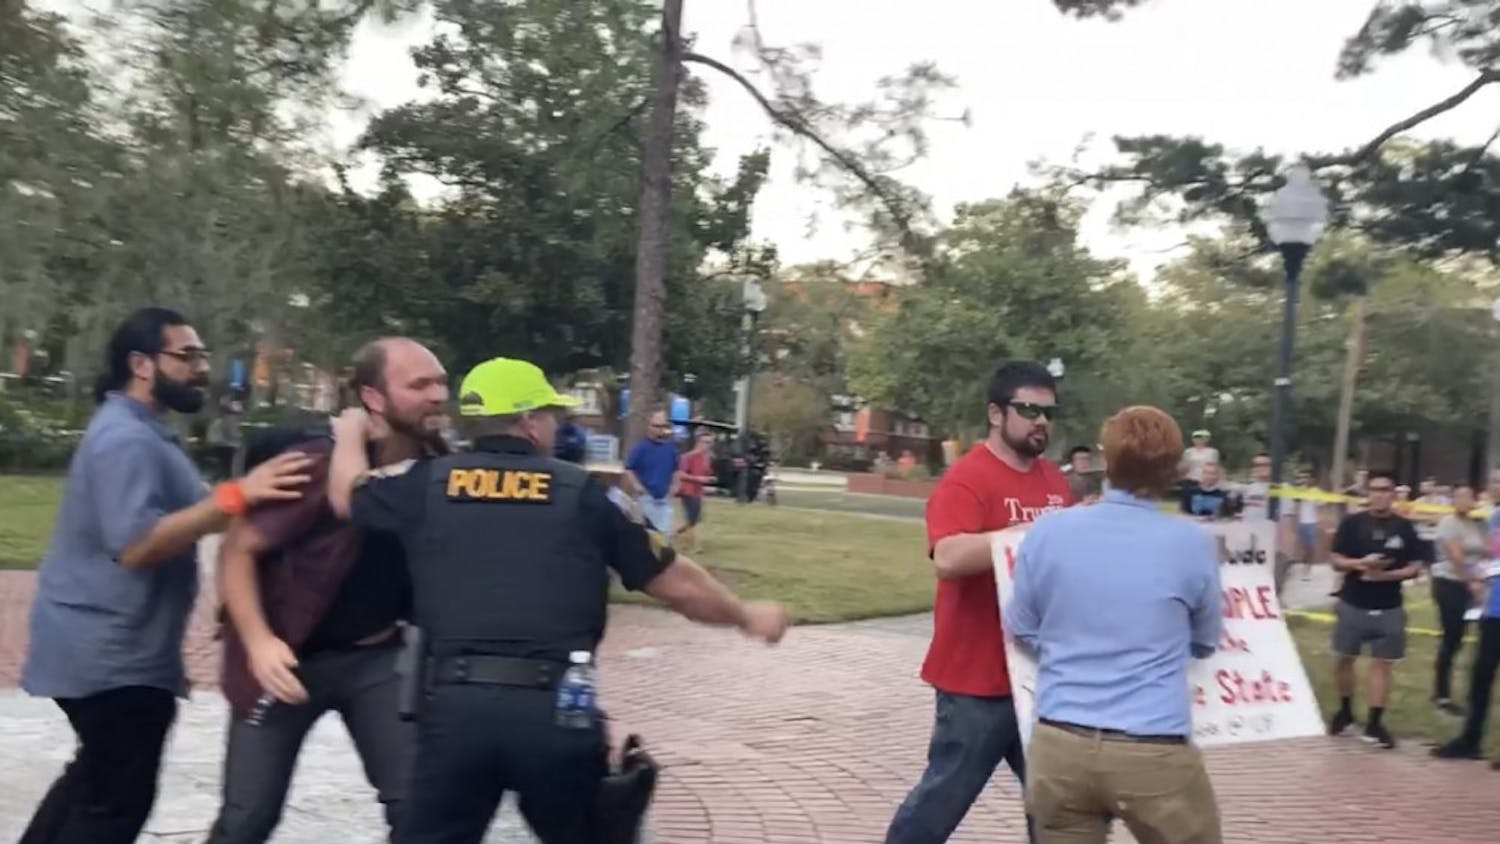 Brian Patrick Smith was outside University Auditorium Thursday night among among protestors who were protesting against Donald Trump Jr. and Kimberly Guilfoyle's speech. Richard Tate was arrested after taking Smith's "Make America Great Again" cap. 